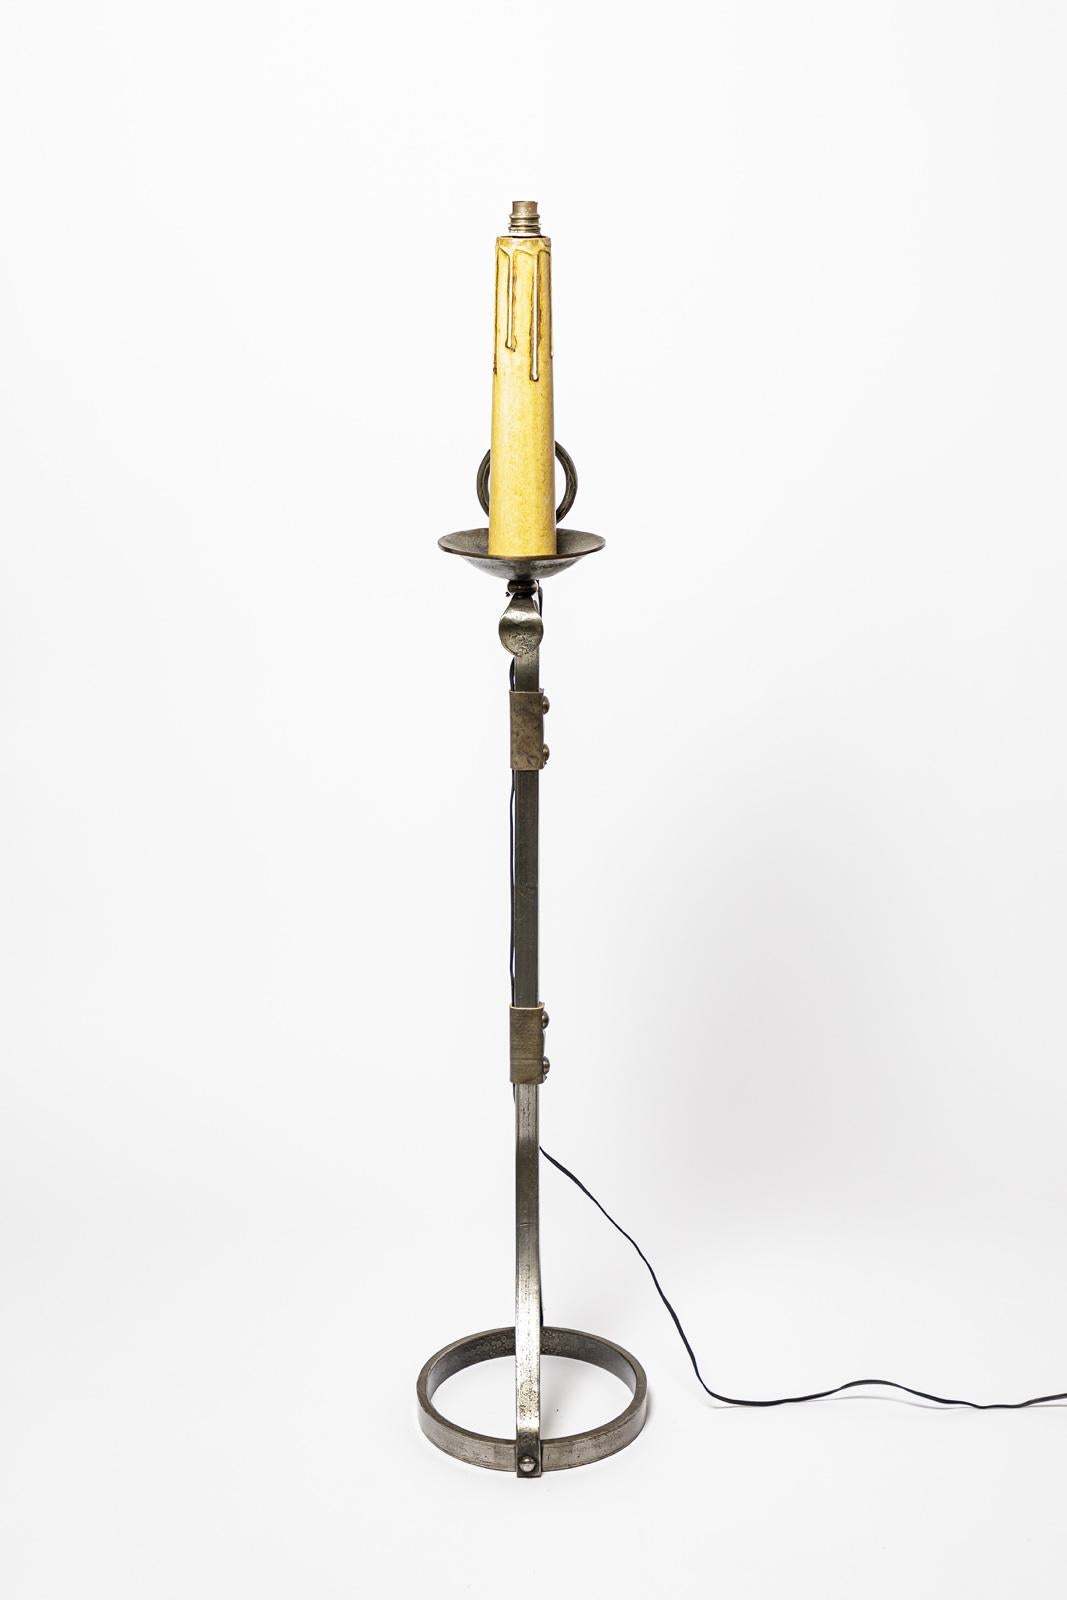 French 20th century floor lamp metal and leather by Jean Pierre Ryckaert Style of adnet For Sale